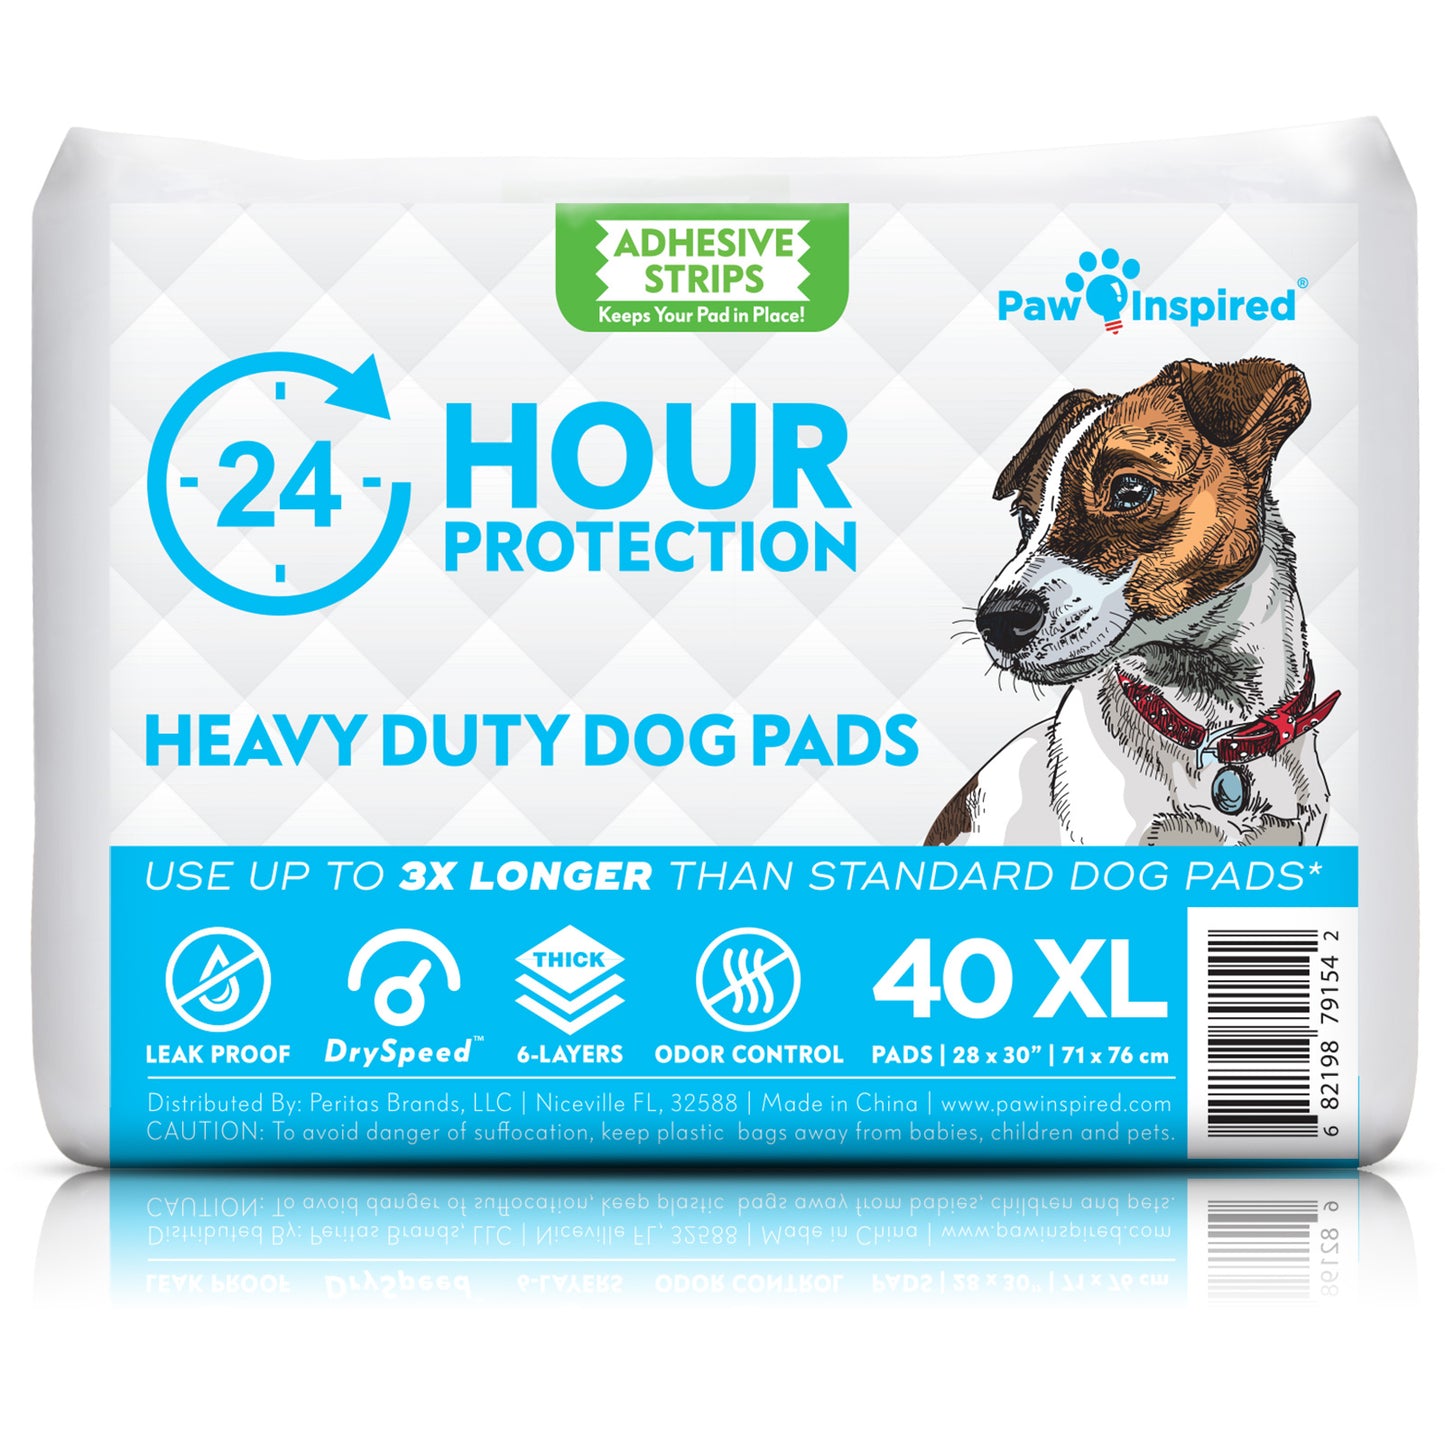 Heavy Duty 24 Hour Protection Dog Pads with Adhesive Strips